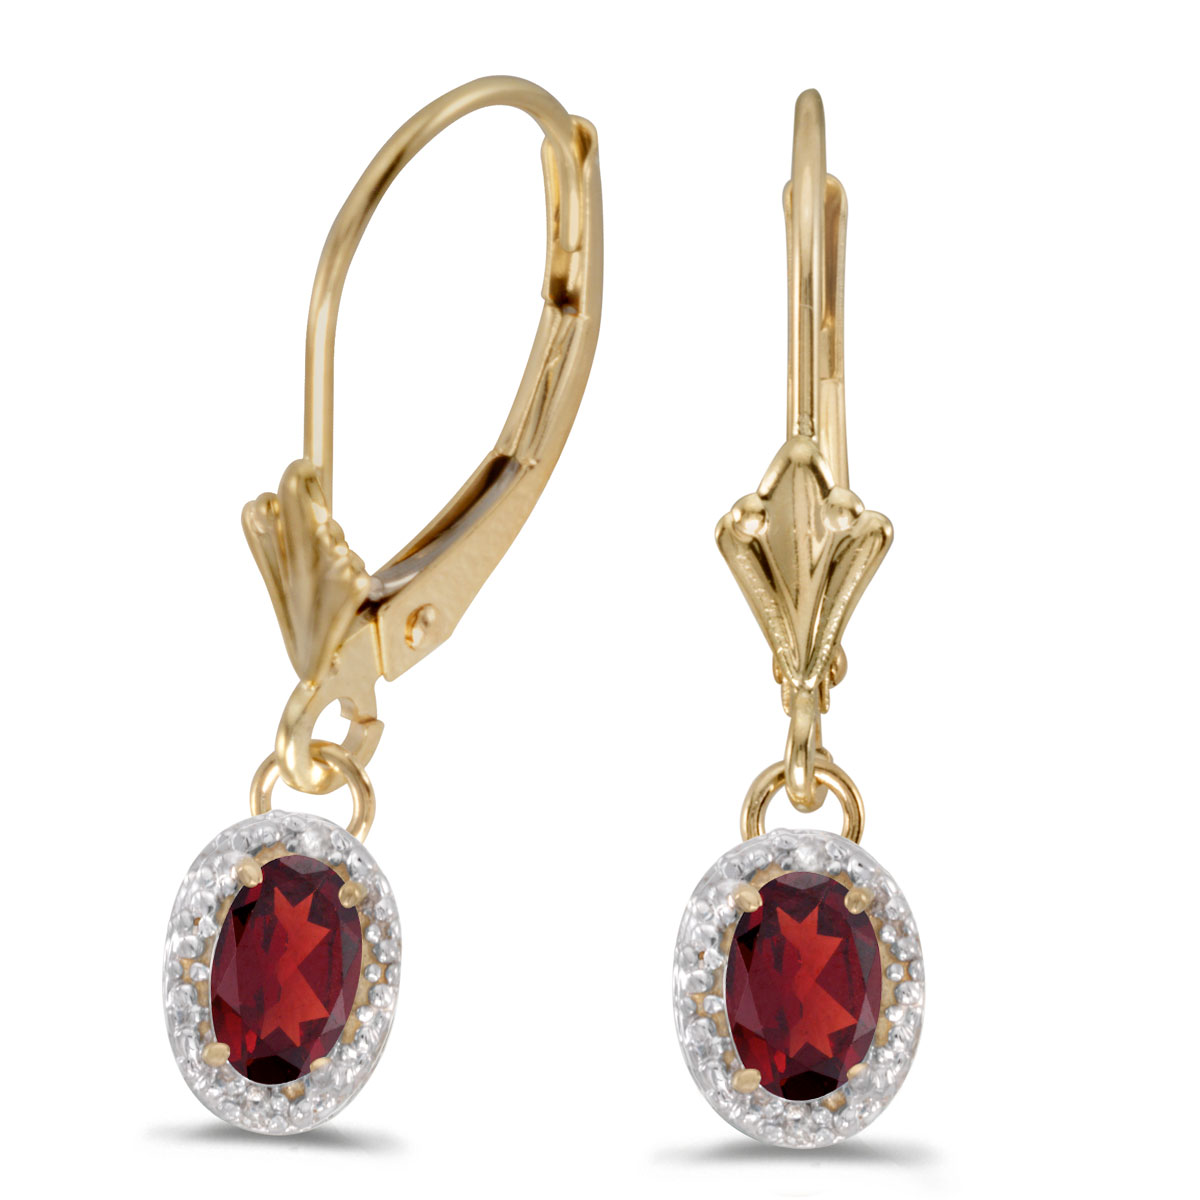 JCX2109: Beautiful 10k yellow gold leverback earrings with striking 6x4 mm garnets complemented with bright diamonds.